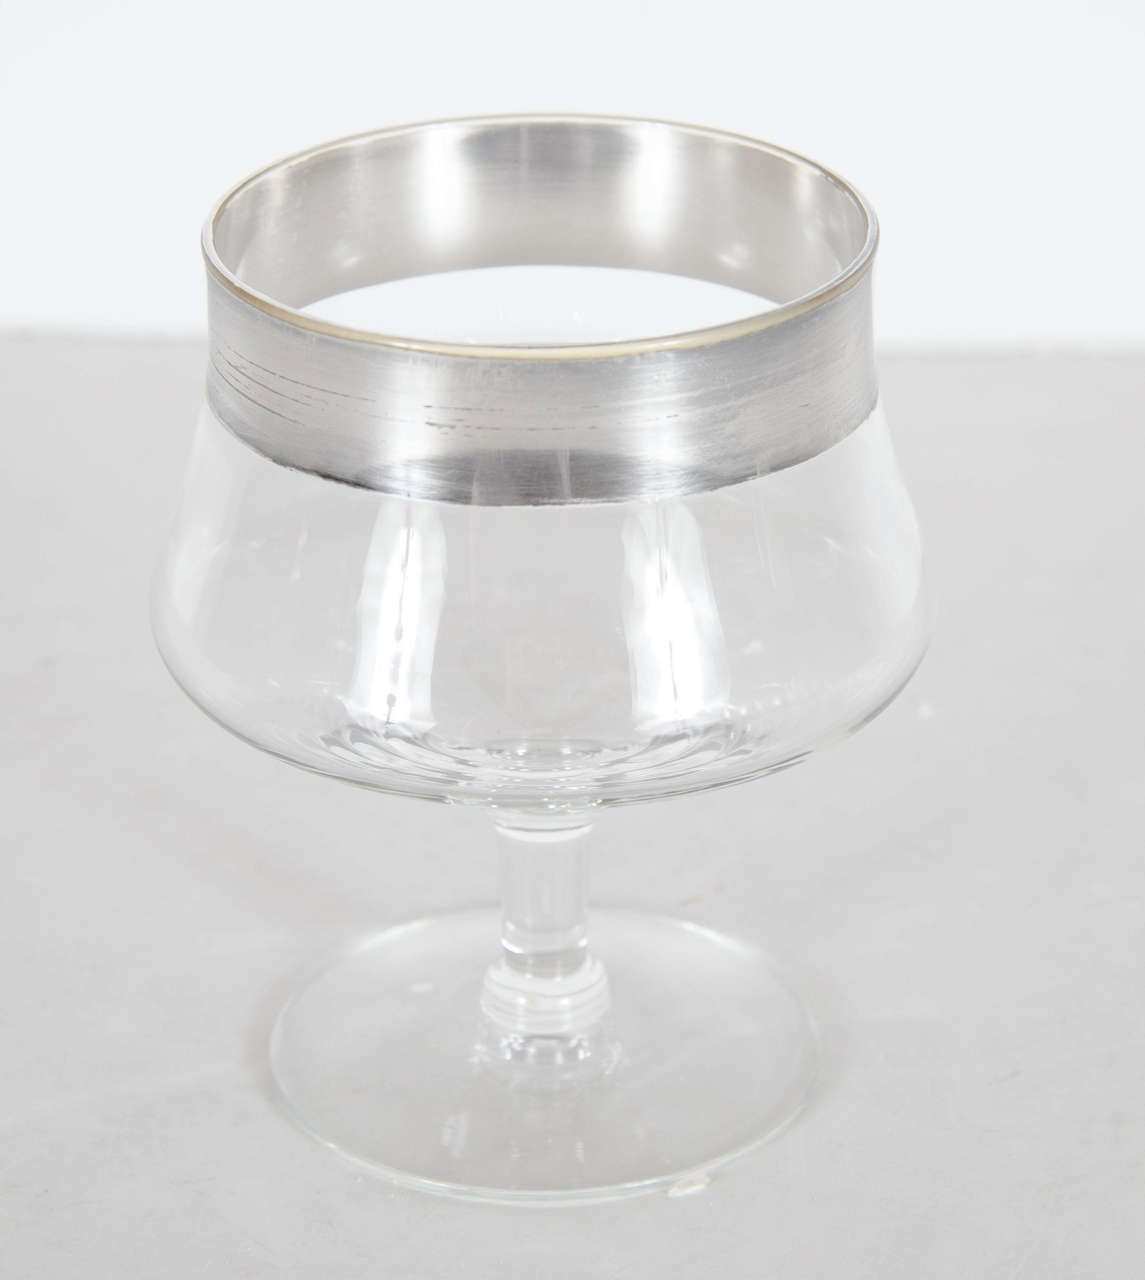 These ultra chic desert glasses feature a thick rim of sterling silver banding overlaid on the glasses by the noted designer Dorothy Thorpe. These would be also great for ice-cream or sorbet.